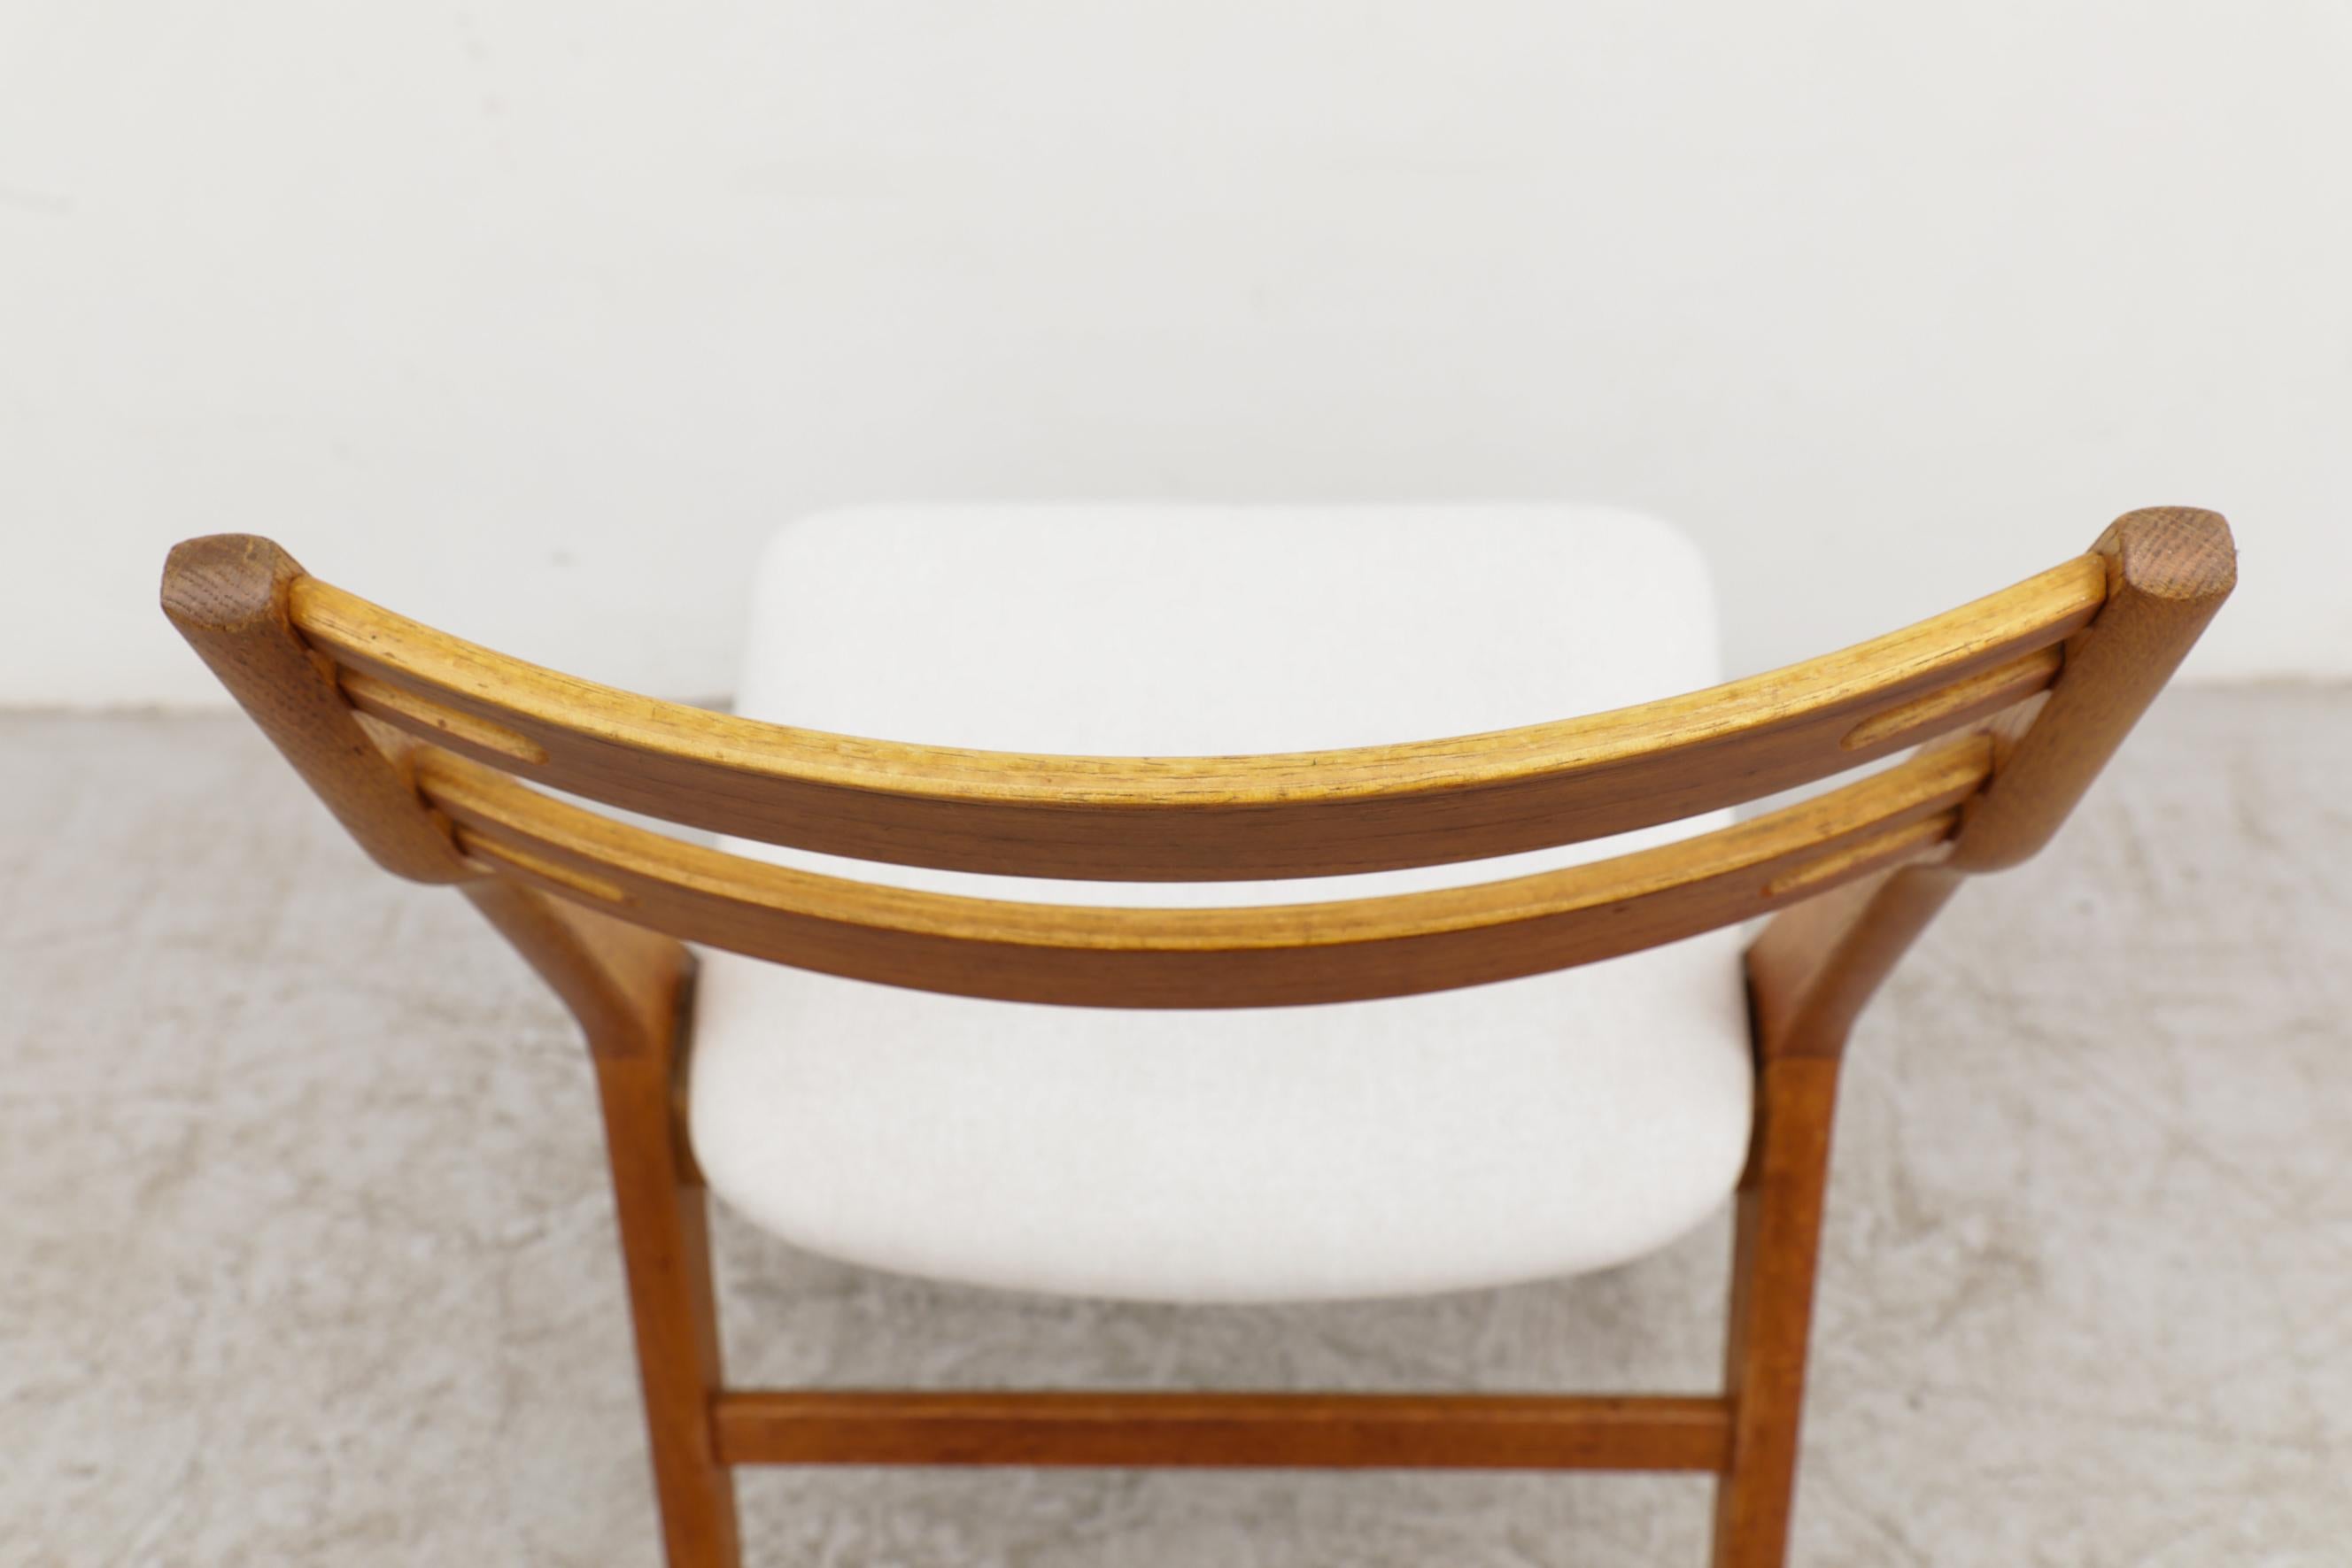 Single Hans Wegner Inspired Oak Dining Chair with Compass Legs and Bowed Back For Sale 12